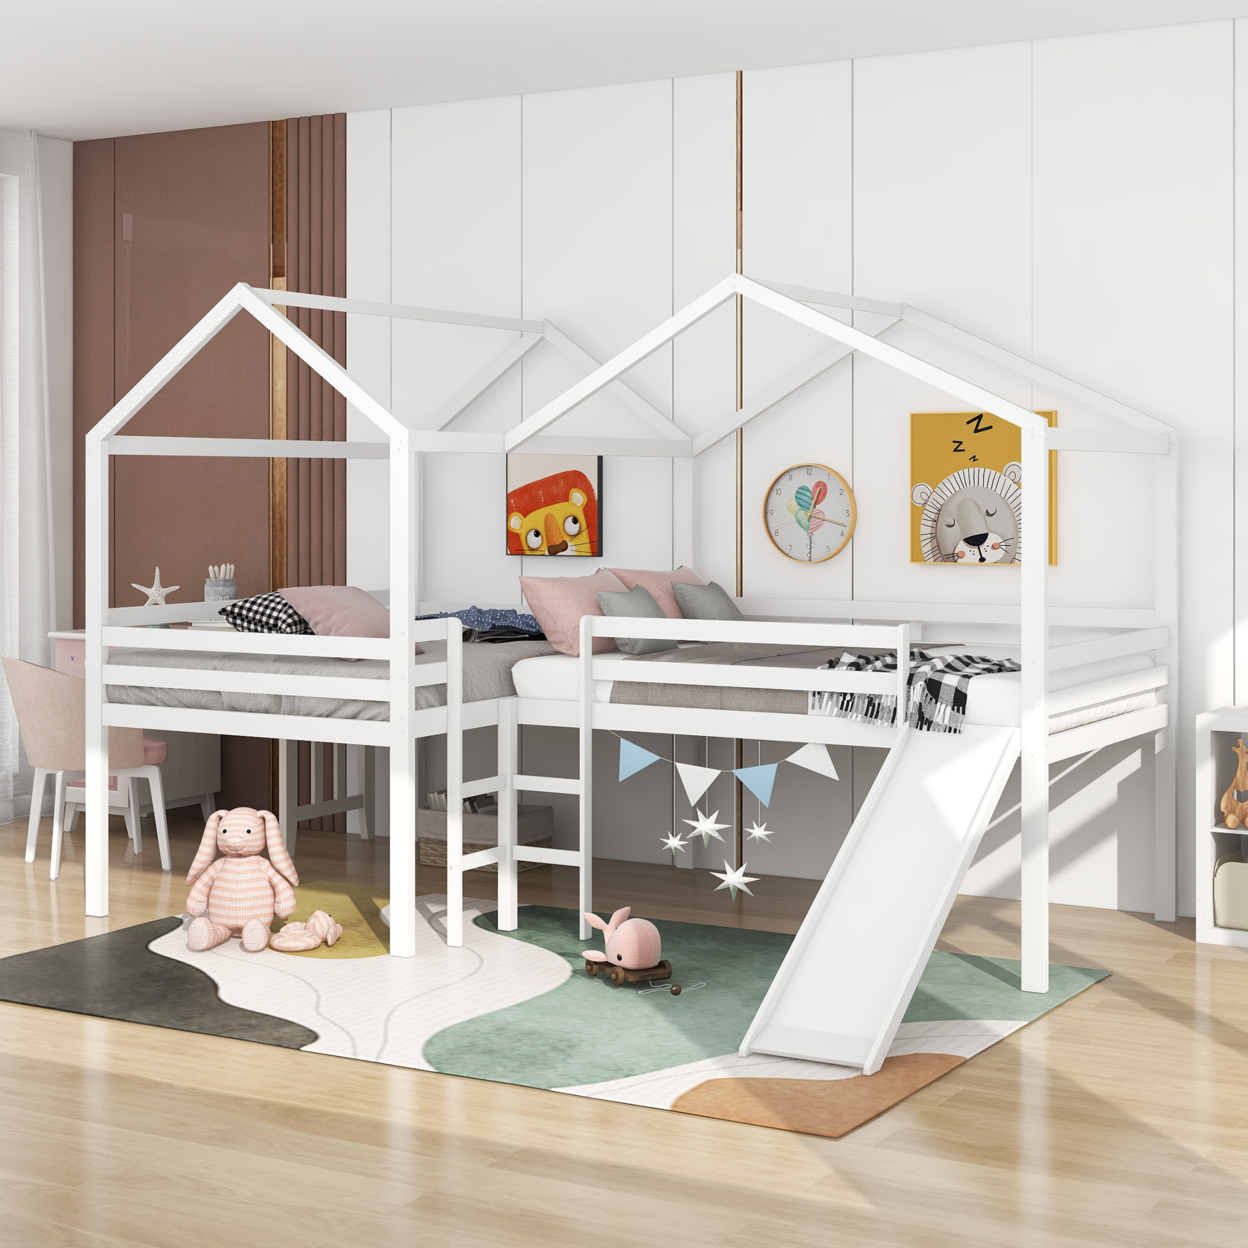 Full size Loft Bed Wood Bed with Roof,Slide,Guardrail,House Bed (White)